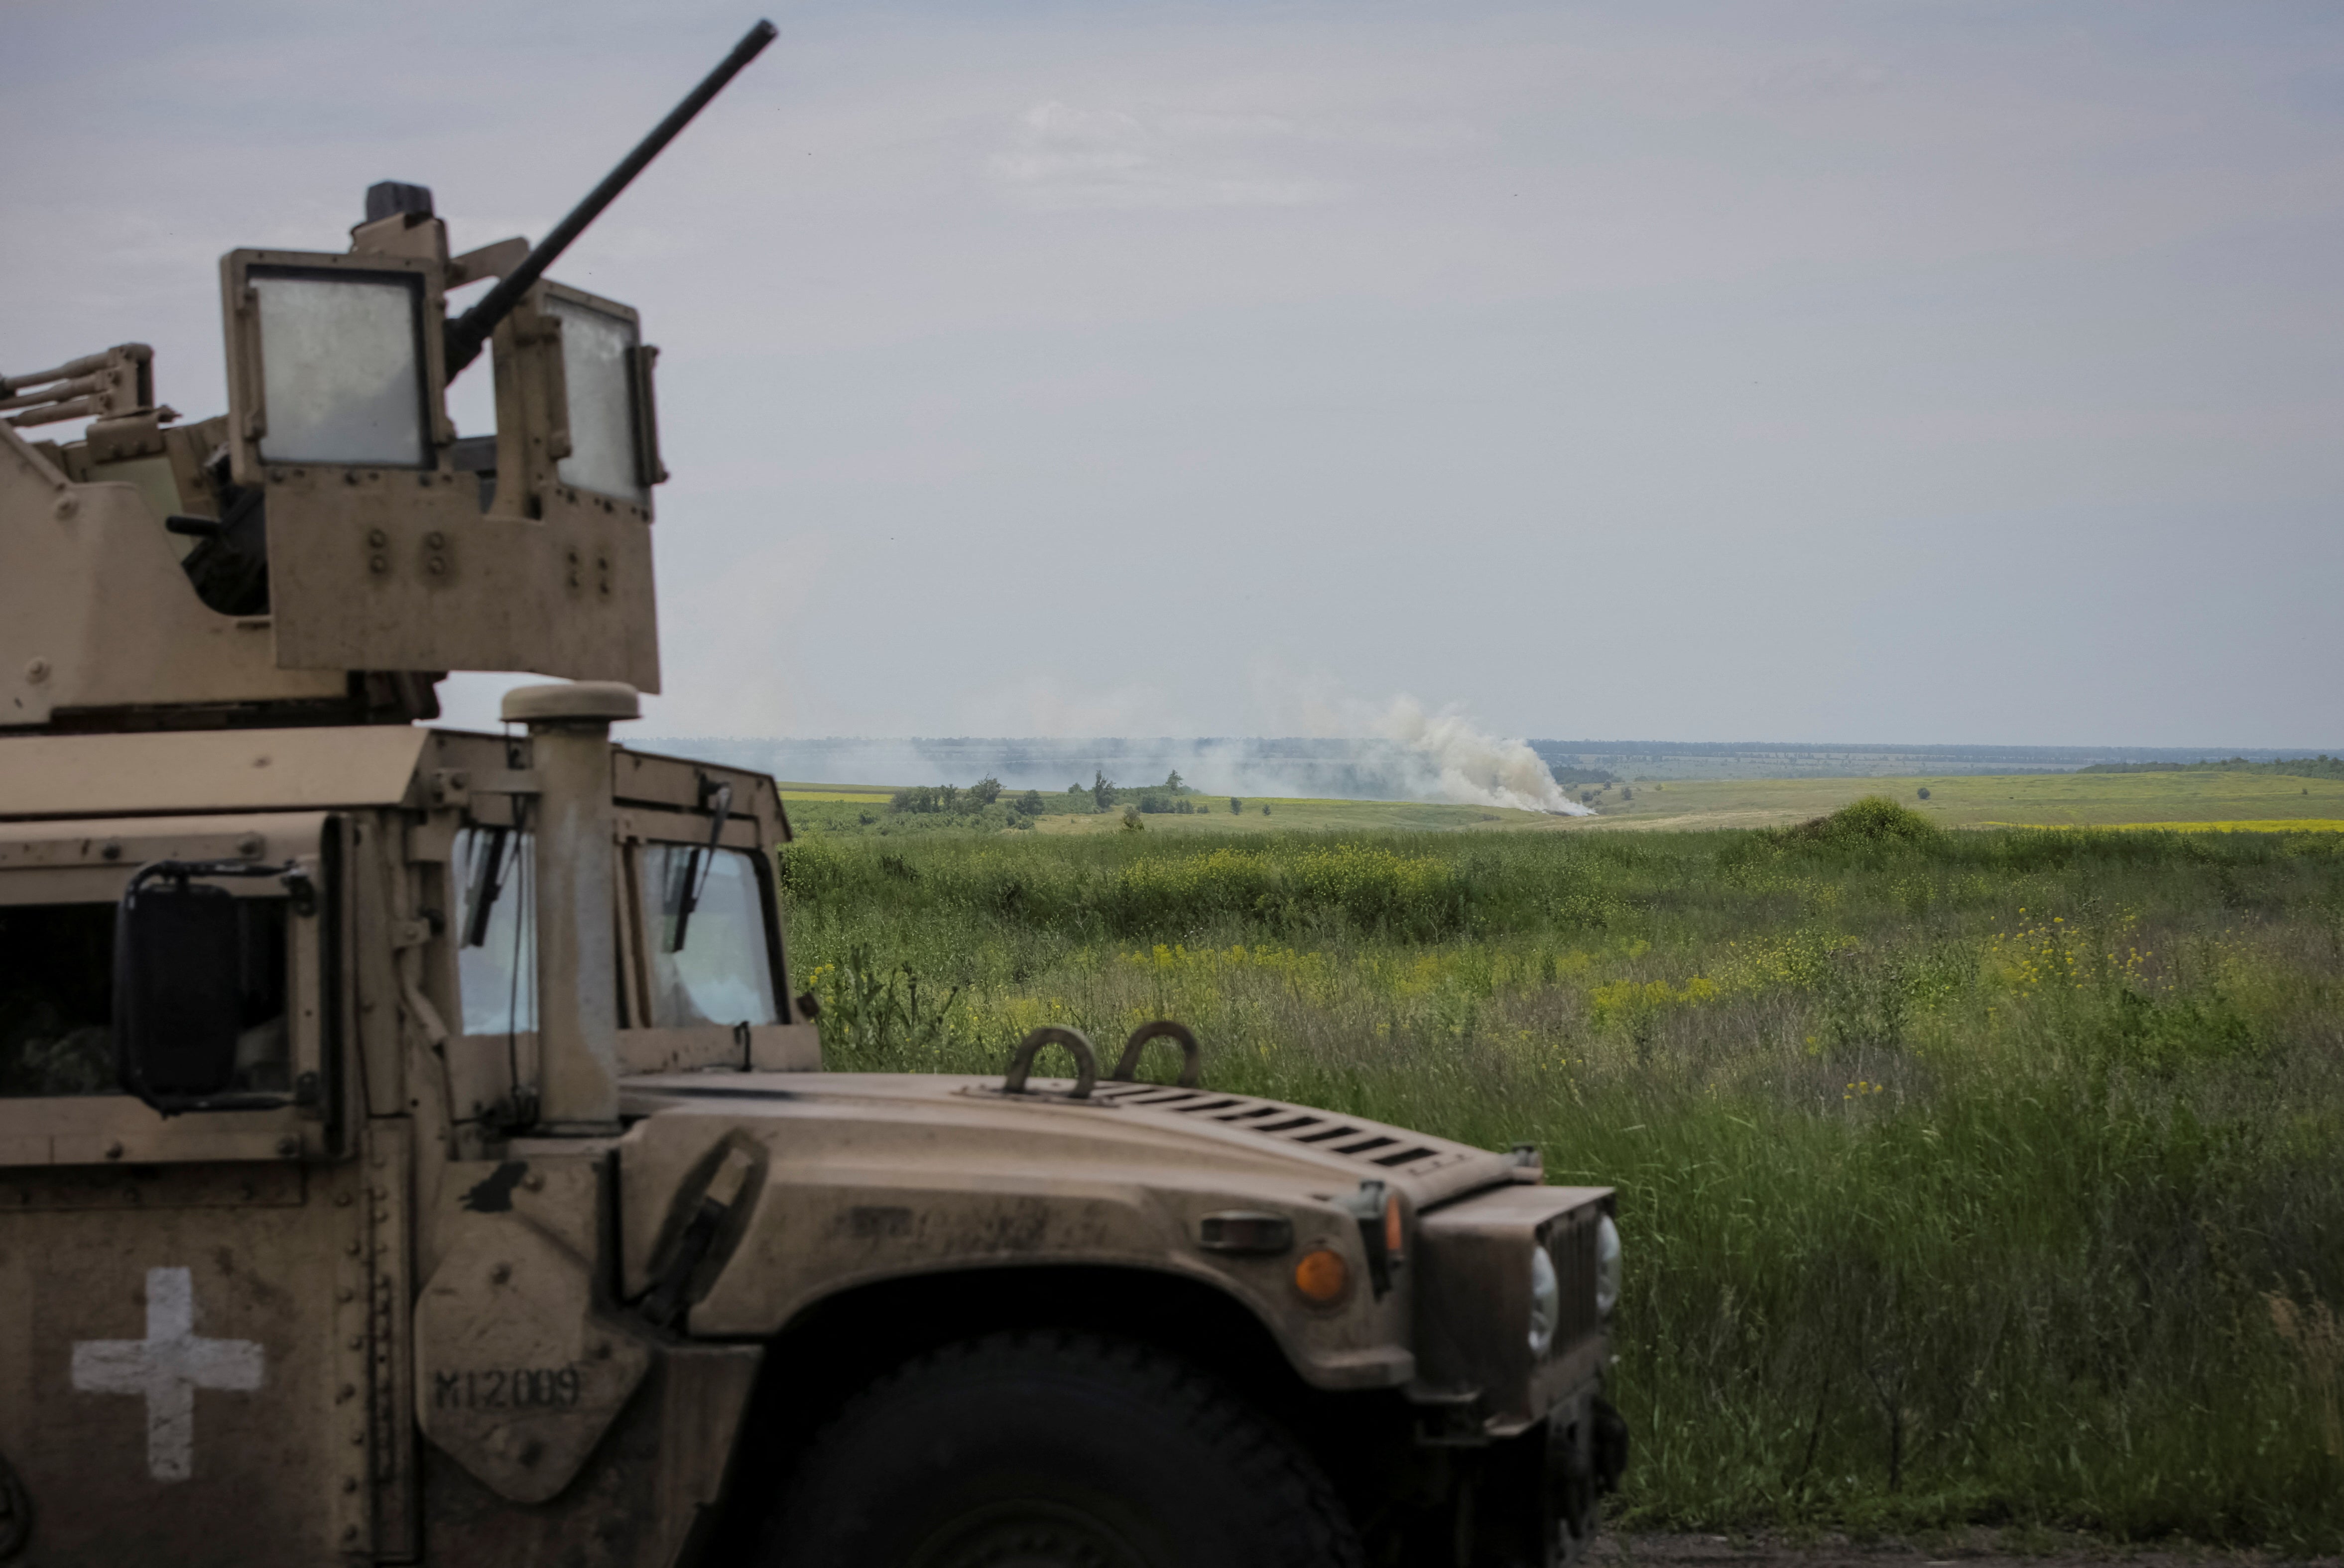 Ukrainian service members ride a military vehicle, amid Russia's full-scale invasion of Ukraine